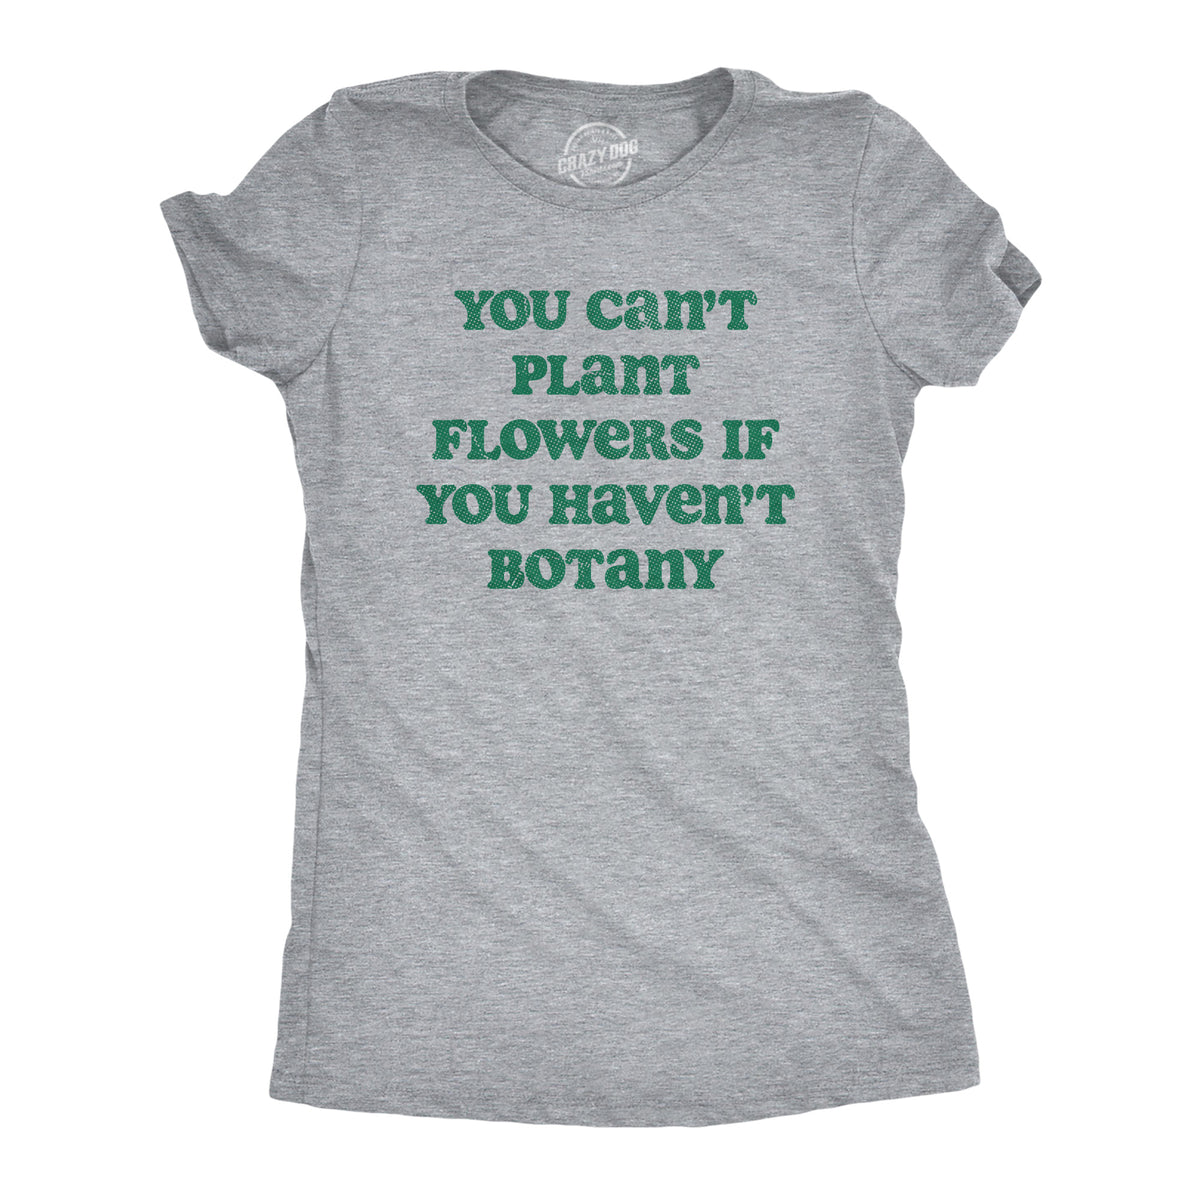 Funny Light Heather Grey - BOTANY You Cant Plant Flowers If You Havent Botany Womens T Shirt Nerdy Sarcastic Tee